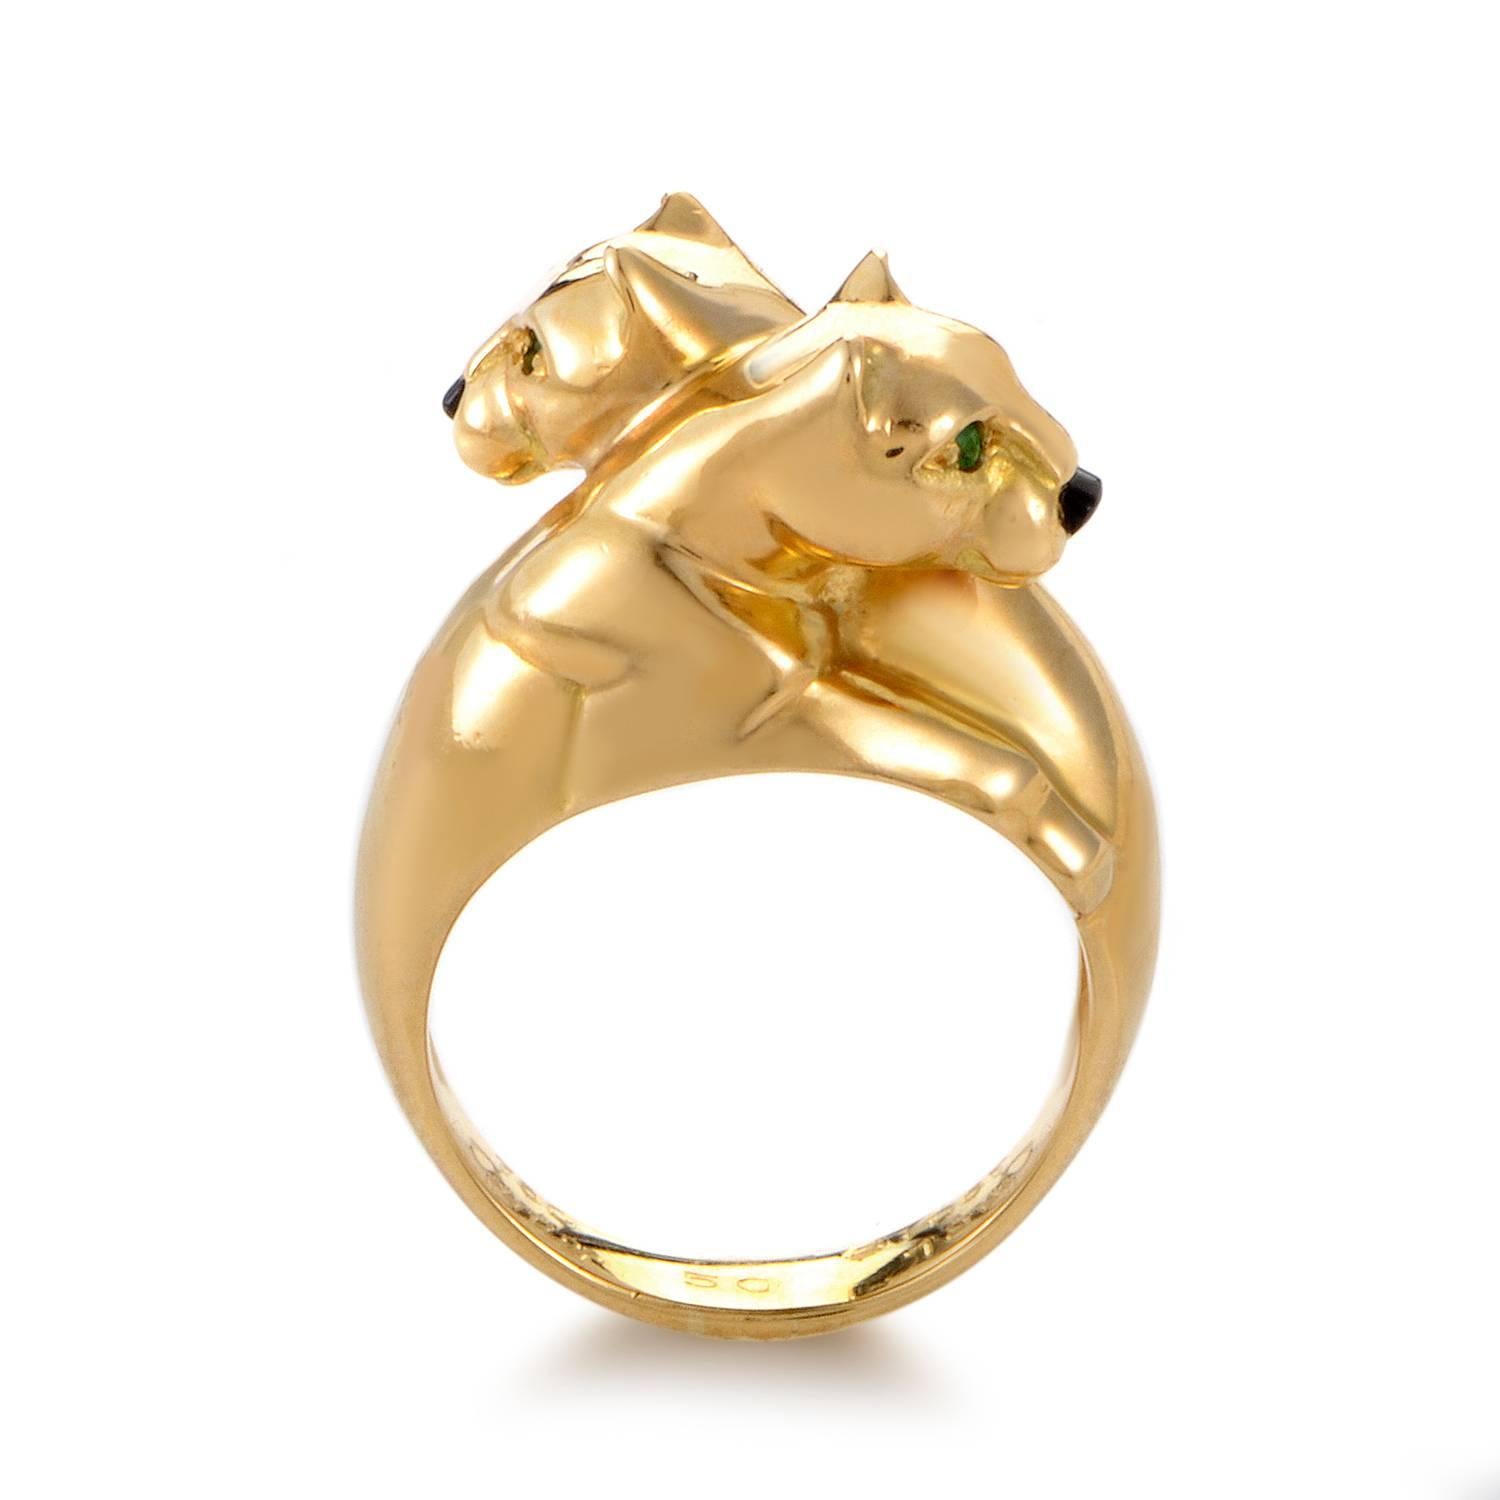 An exotic feline motif takes center stage atop this intriguing ring from Cartier. The band of 18K yellow gold rises into twin panther heads.Their snouts are shaped from onyx, their eyes made from shimmering emeralds. A unique extravagance in